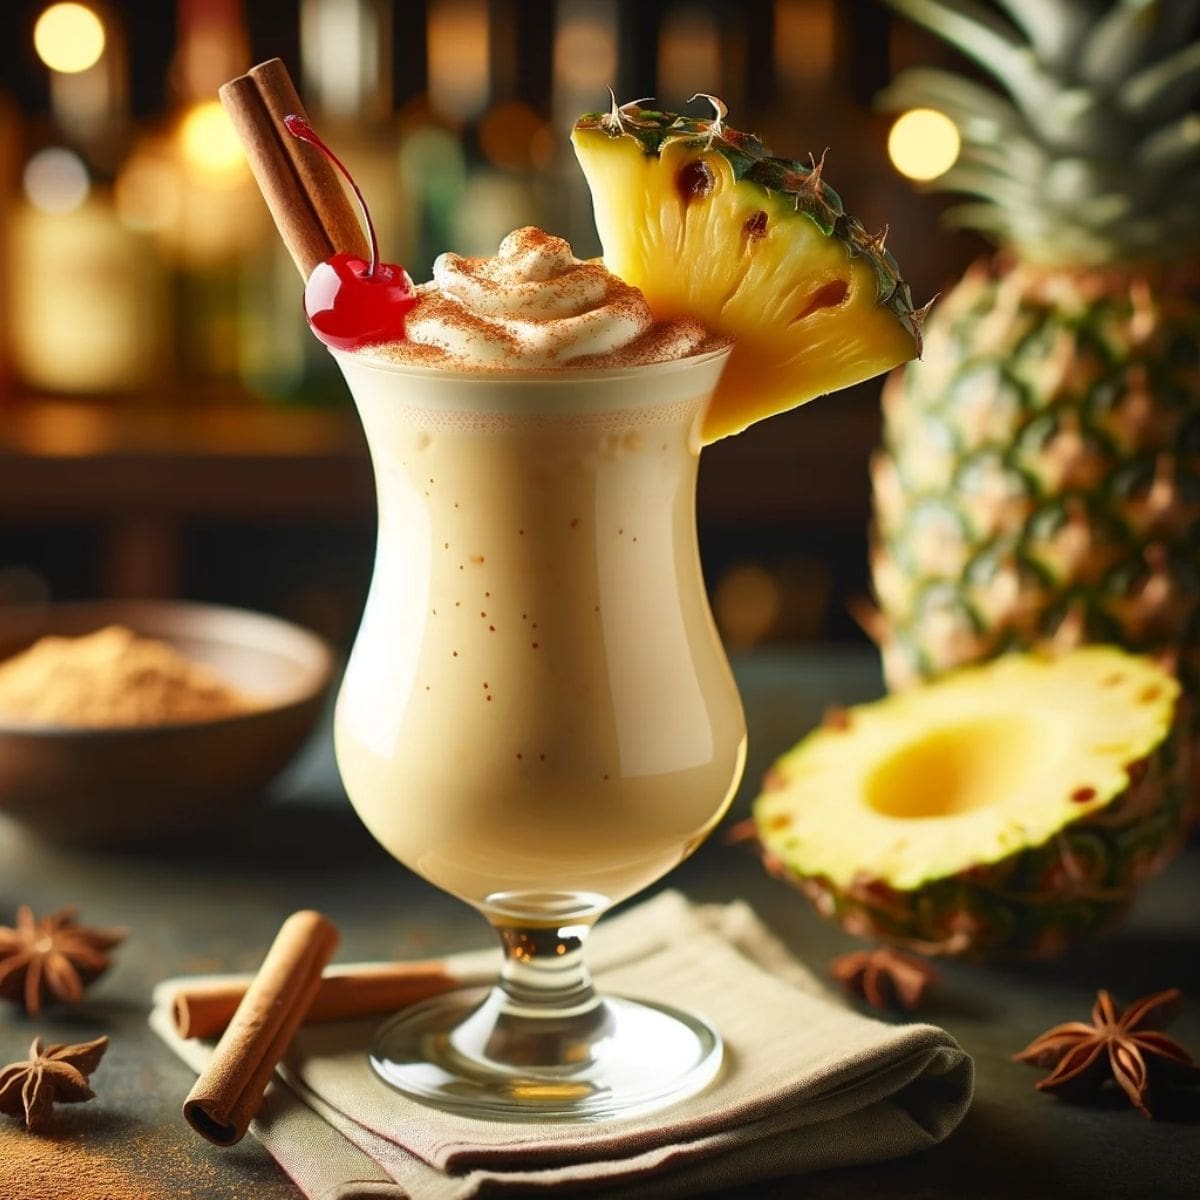 A close-up photo of a delicious and refreshing spiced rum painkiller beverage